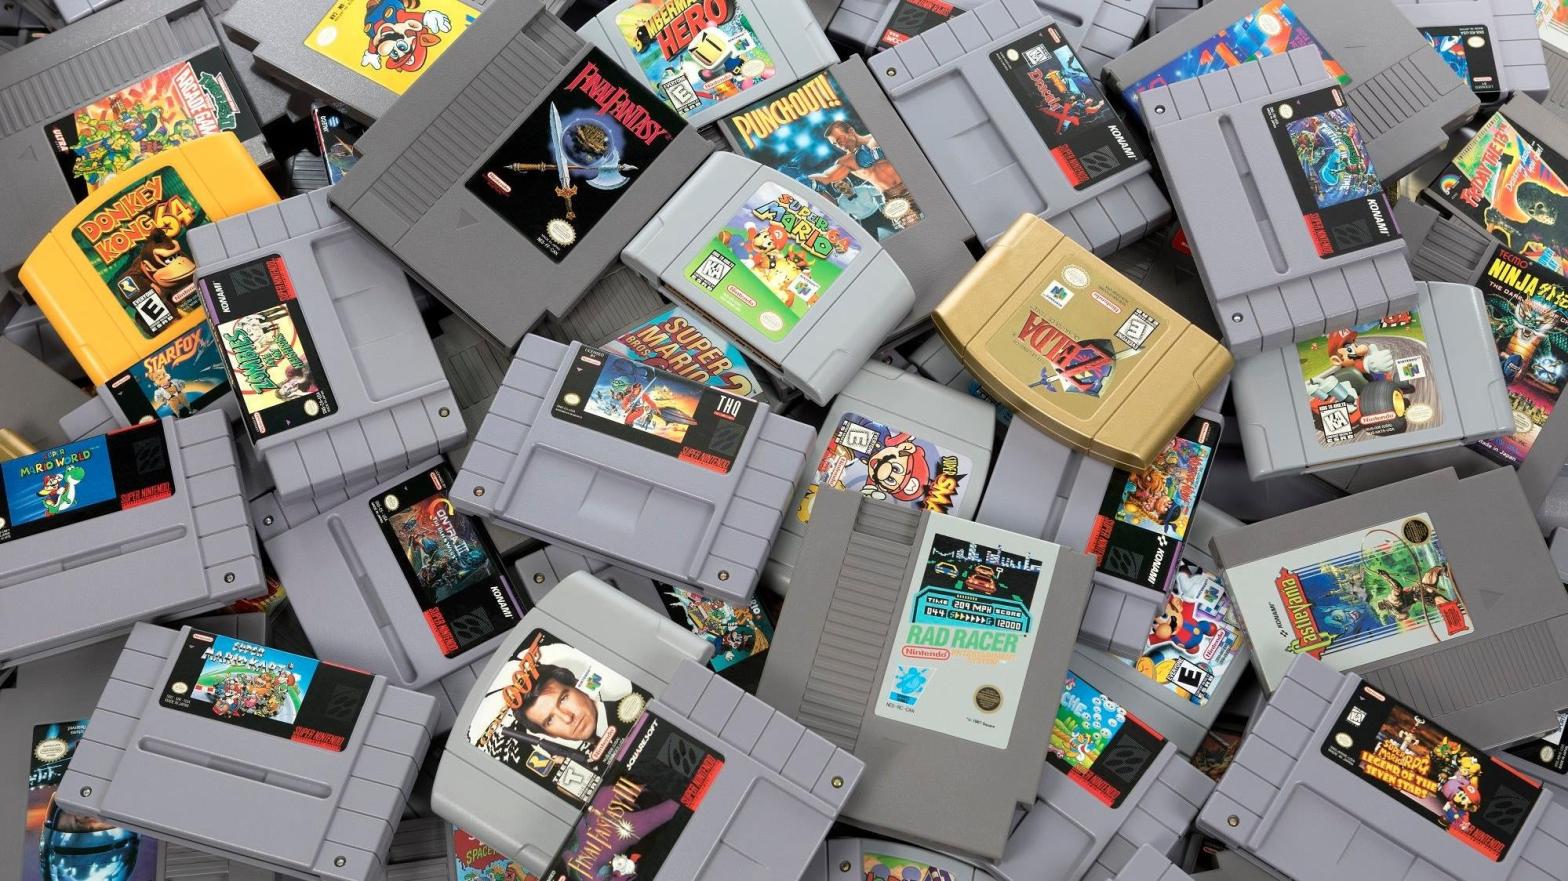 Makers Of iPhone’s Hit Nintendo Emulator Hope It Jumpstarts iTunes For Classic Games